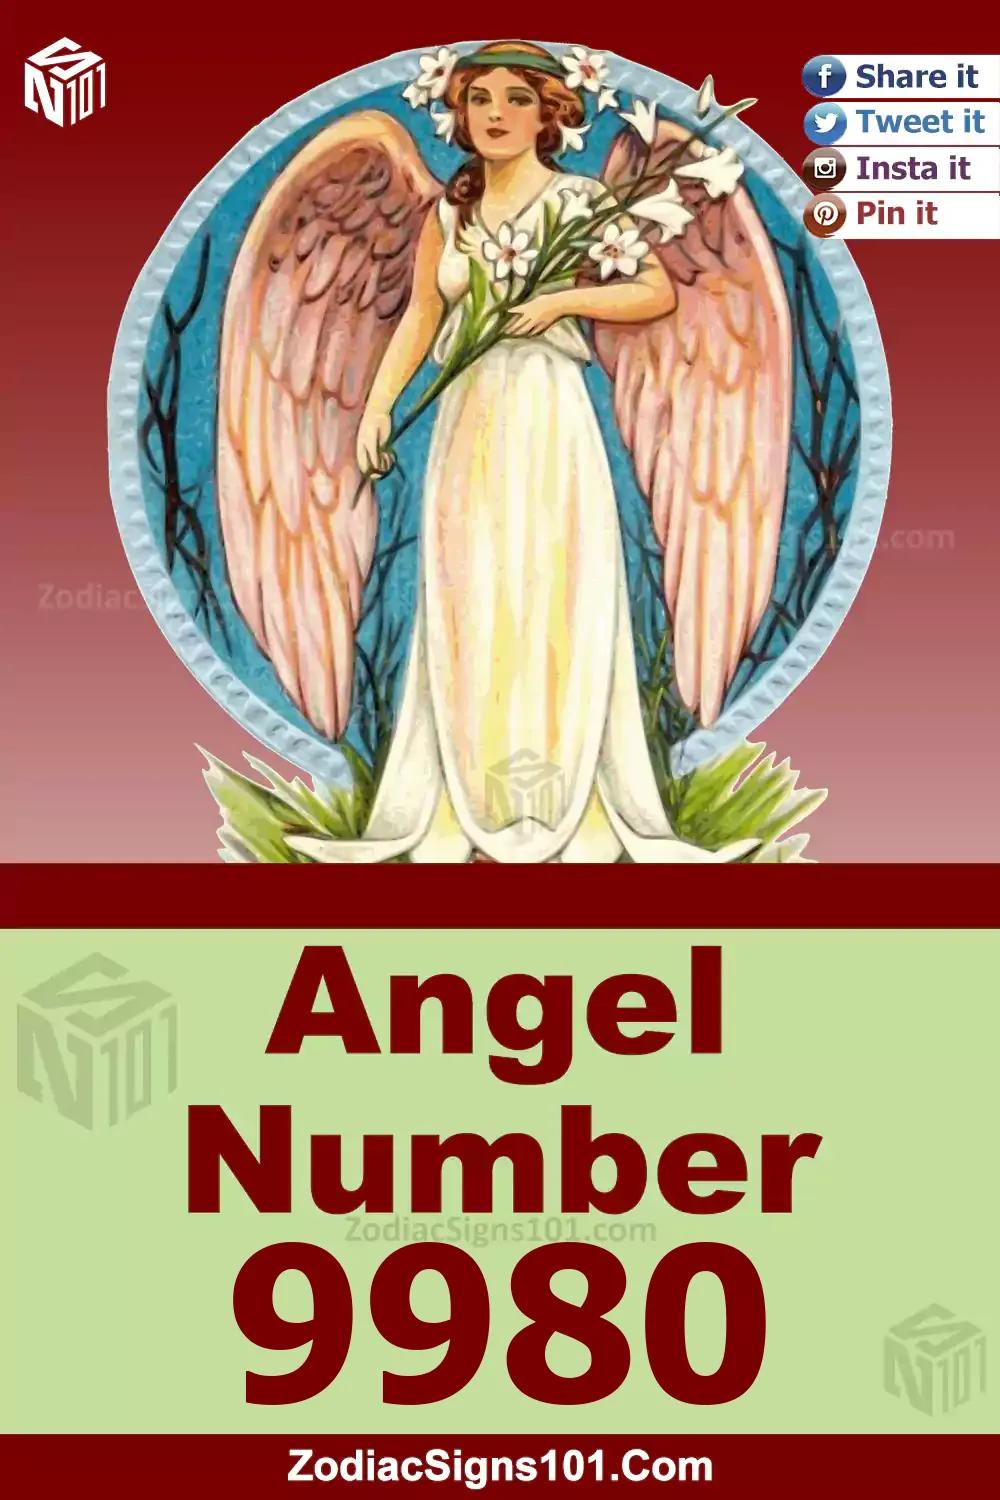 9980 Angel Number Meaning